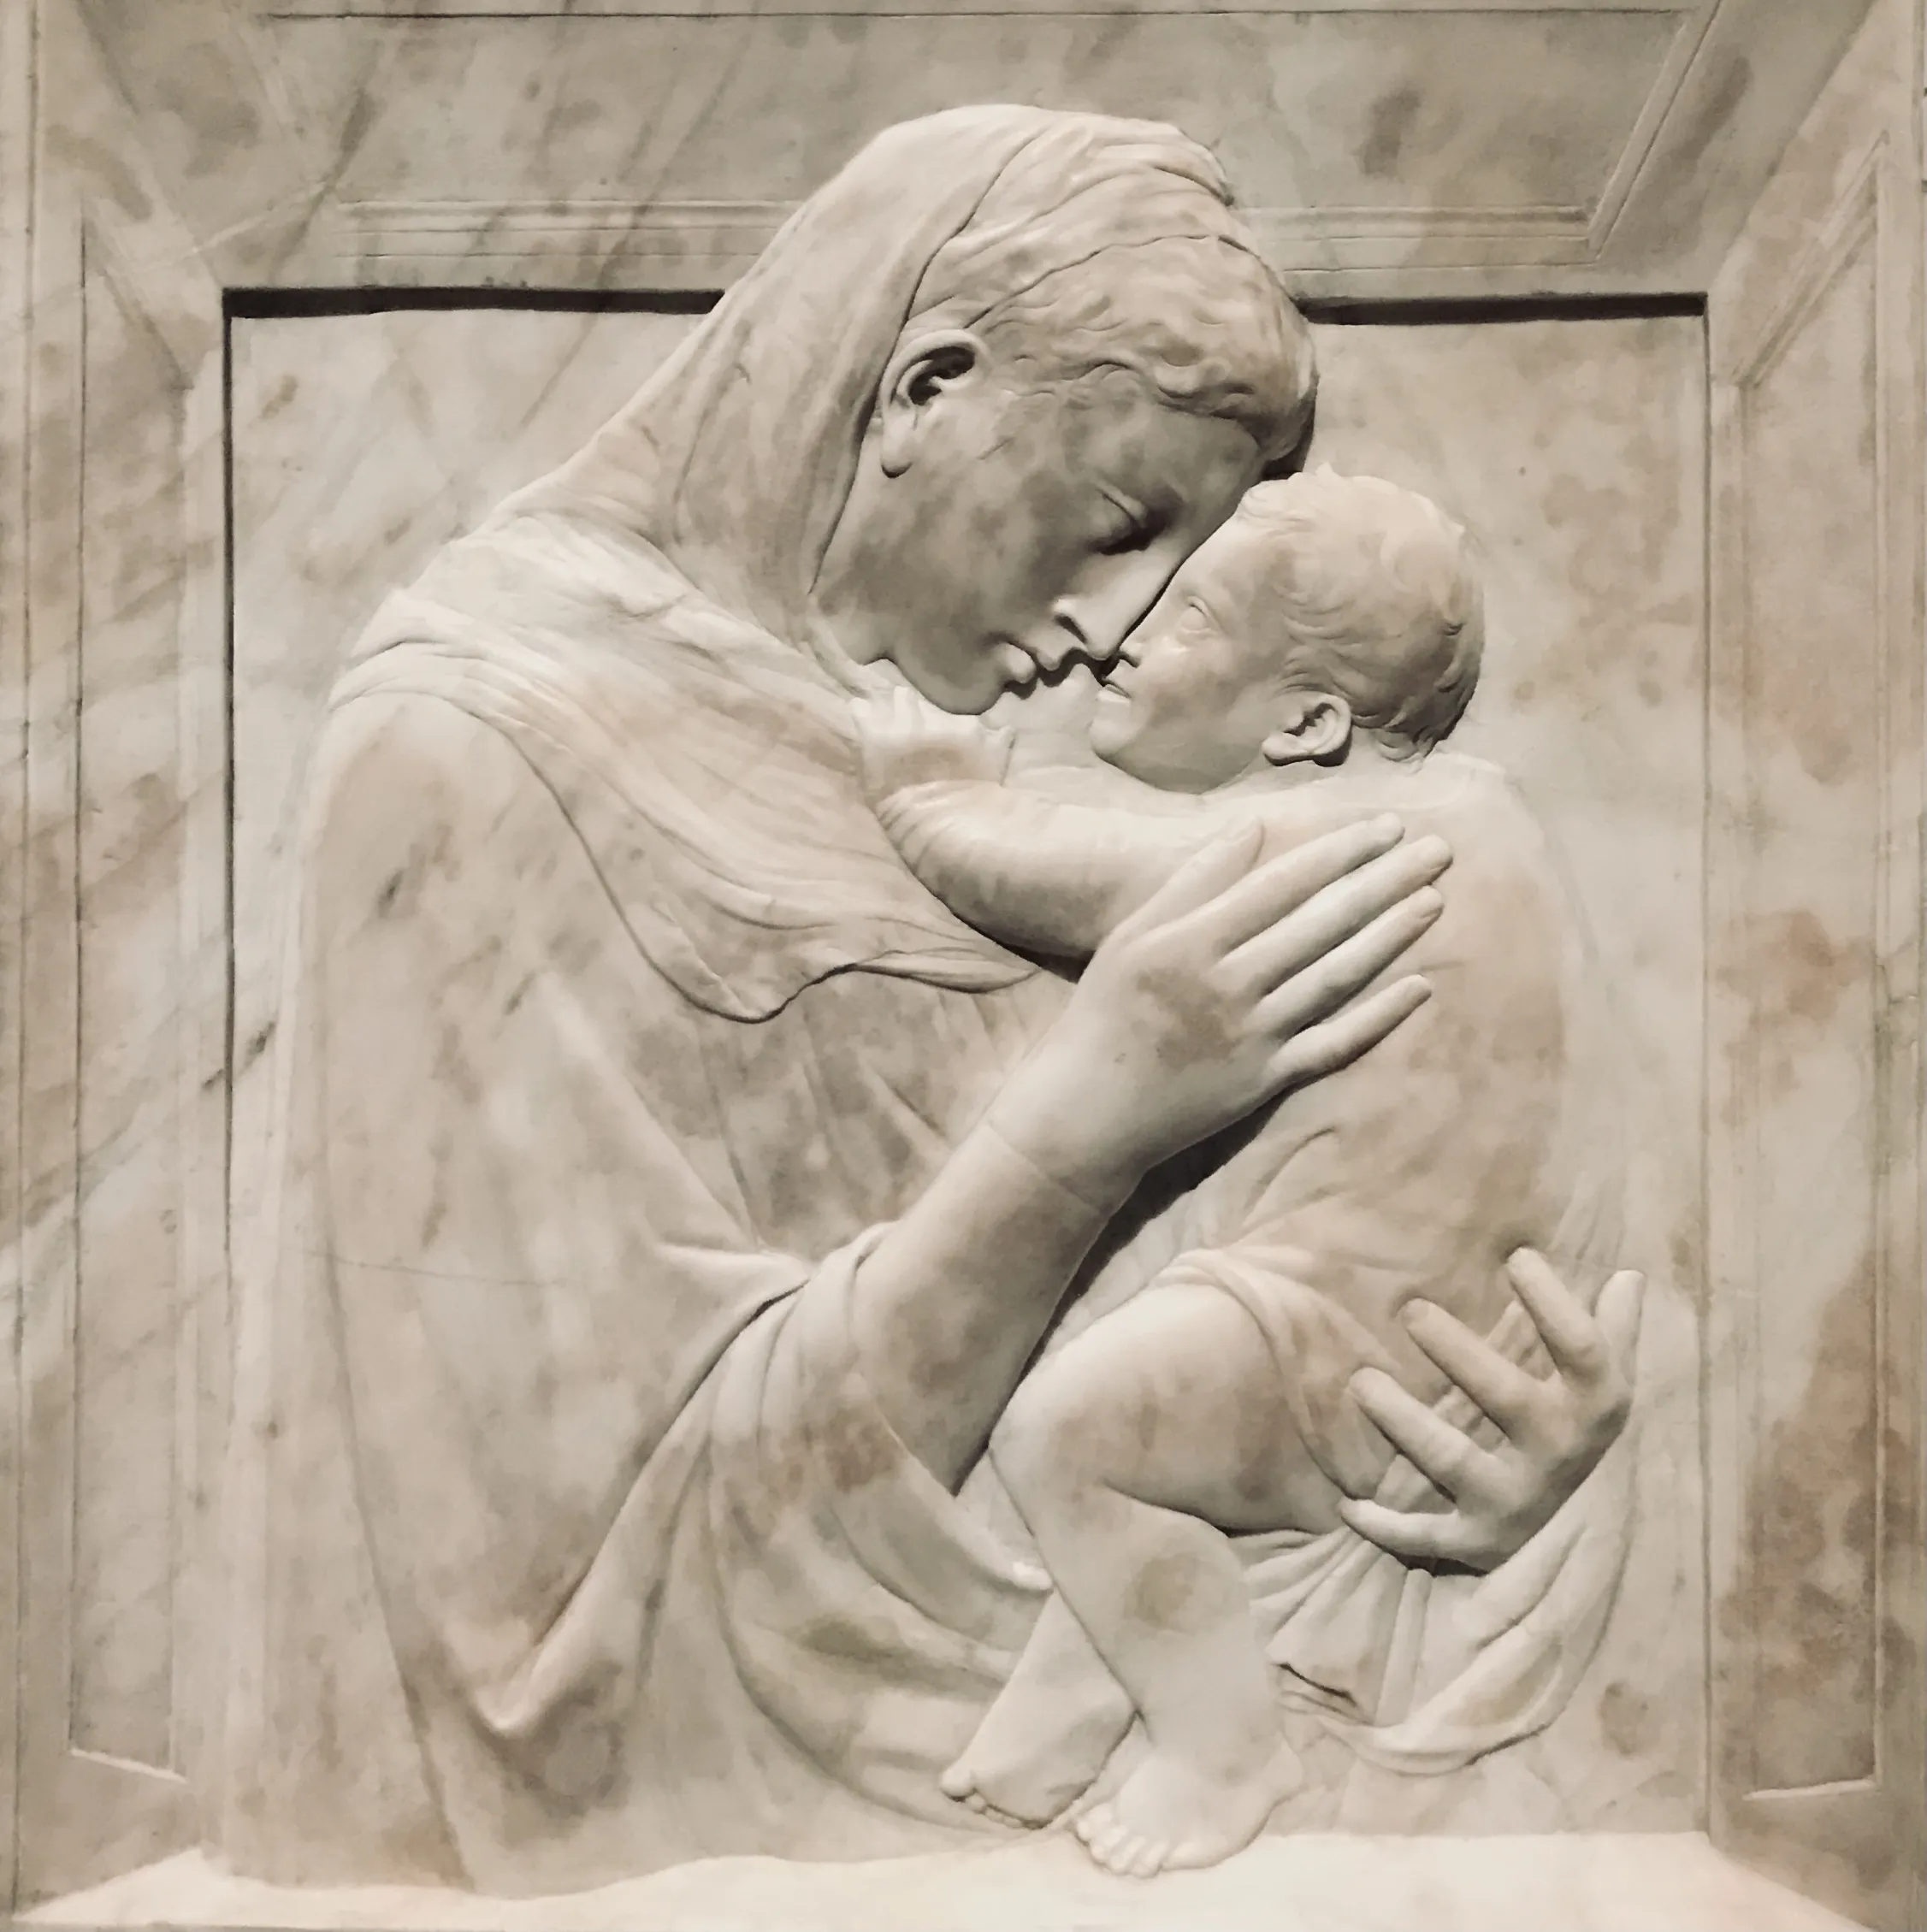 The tender side of Catholic art is seen in Donatello's Pazzi Madonna (from Staatliche Museen Berlin), which is also an early exercise in perspective. Photo by Lucien de Guise